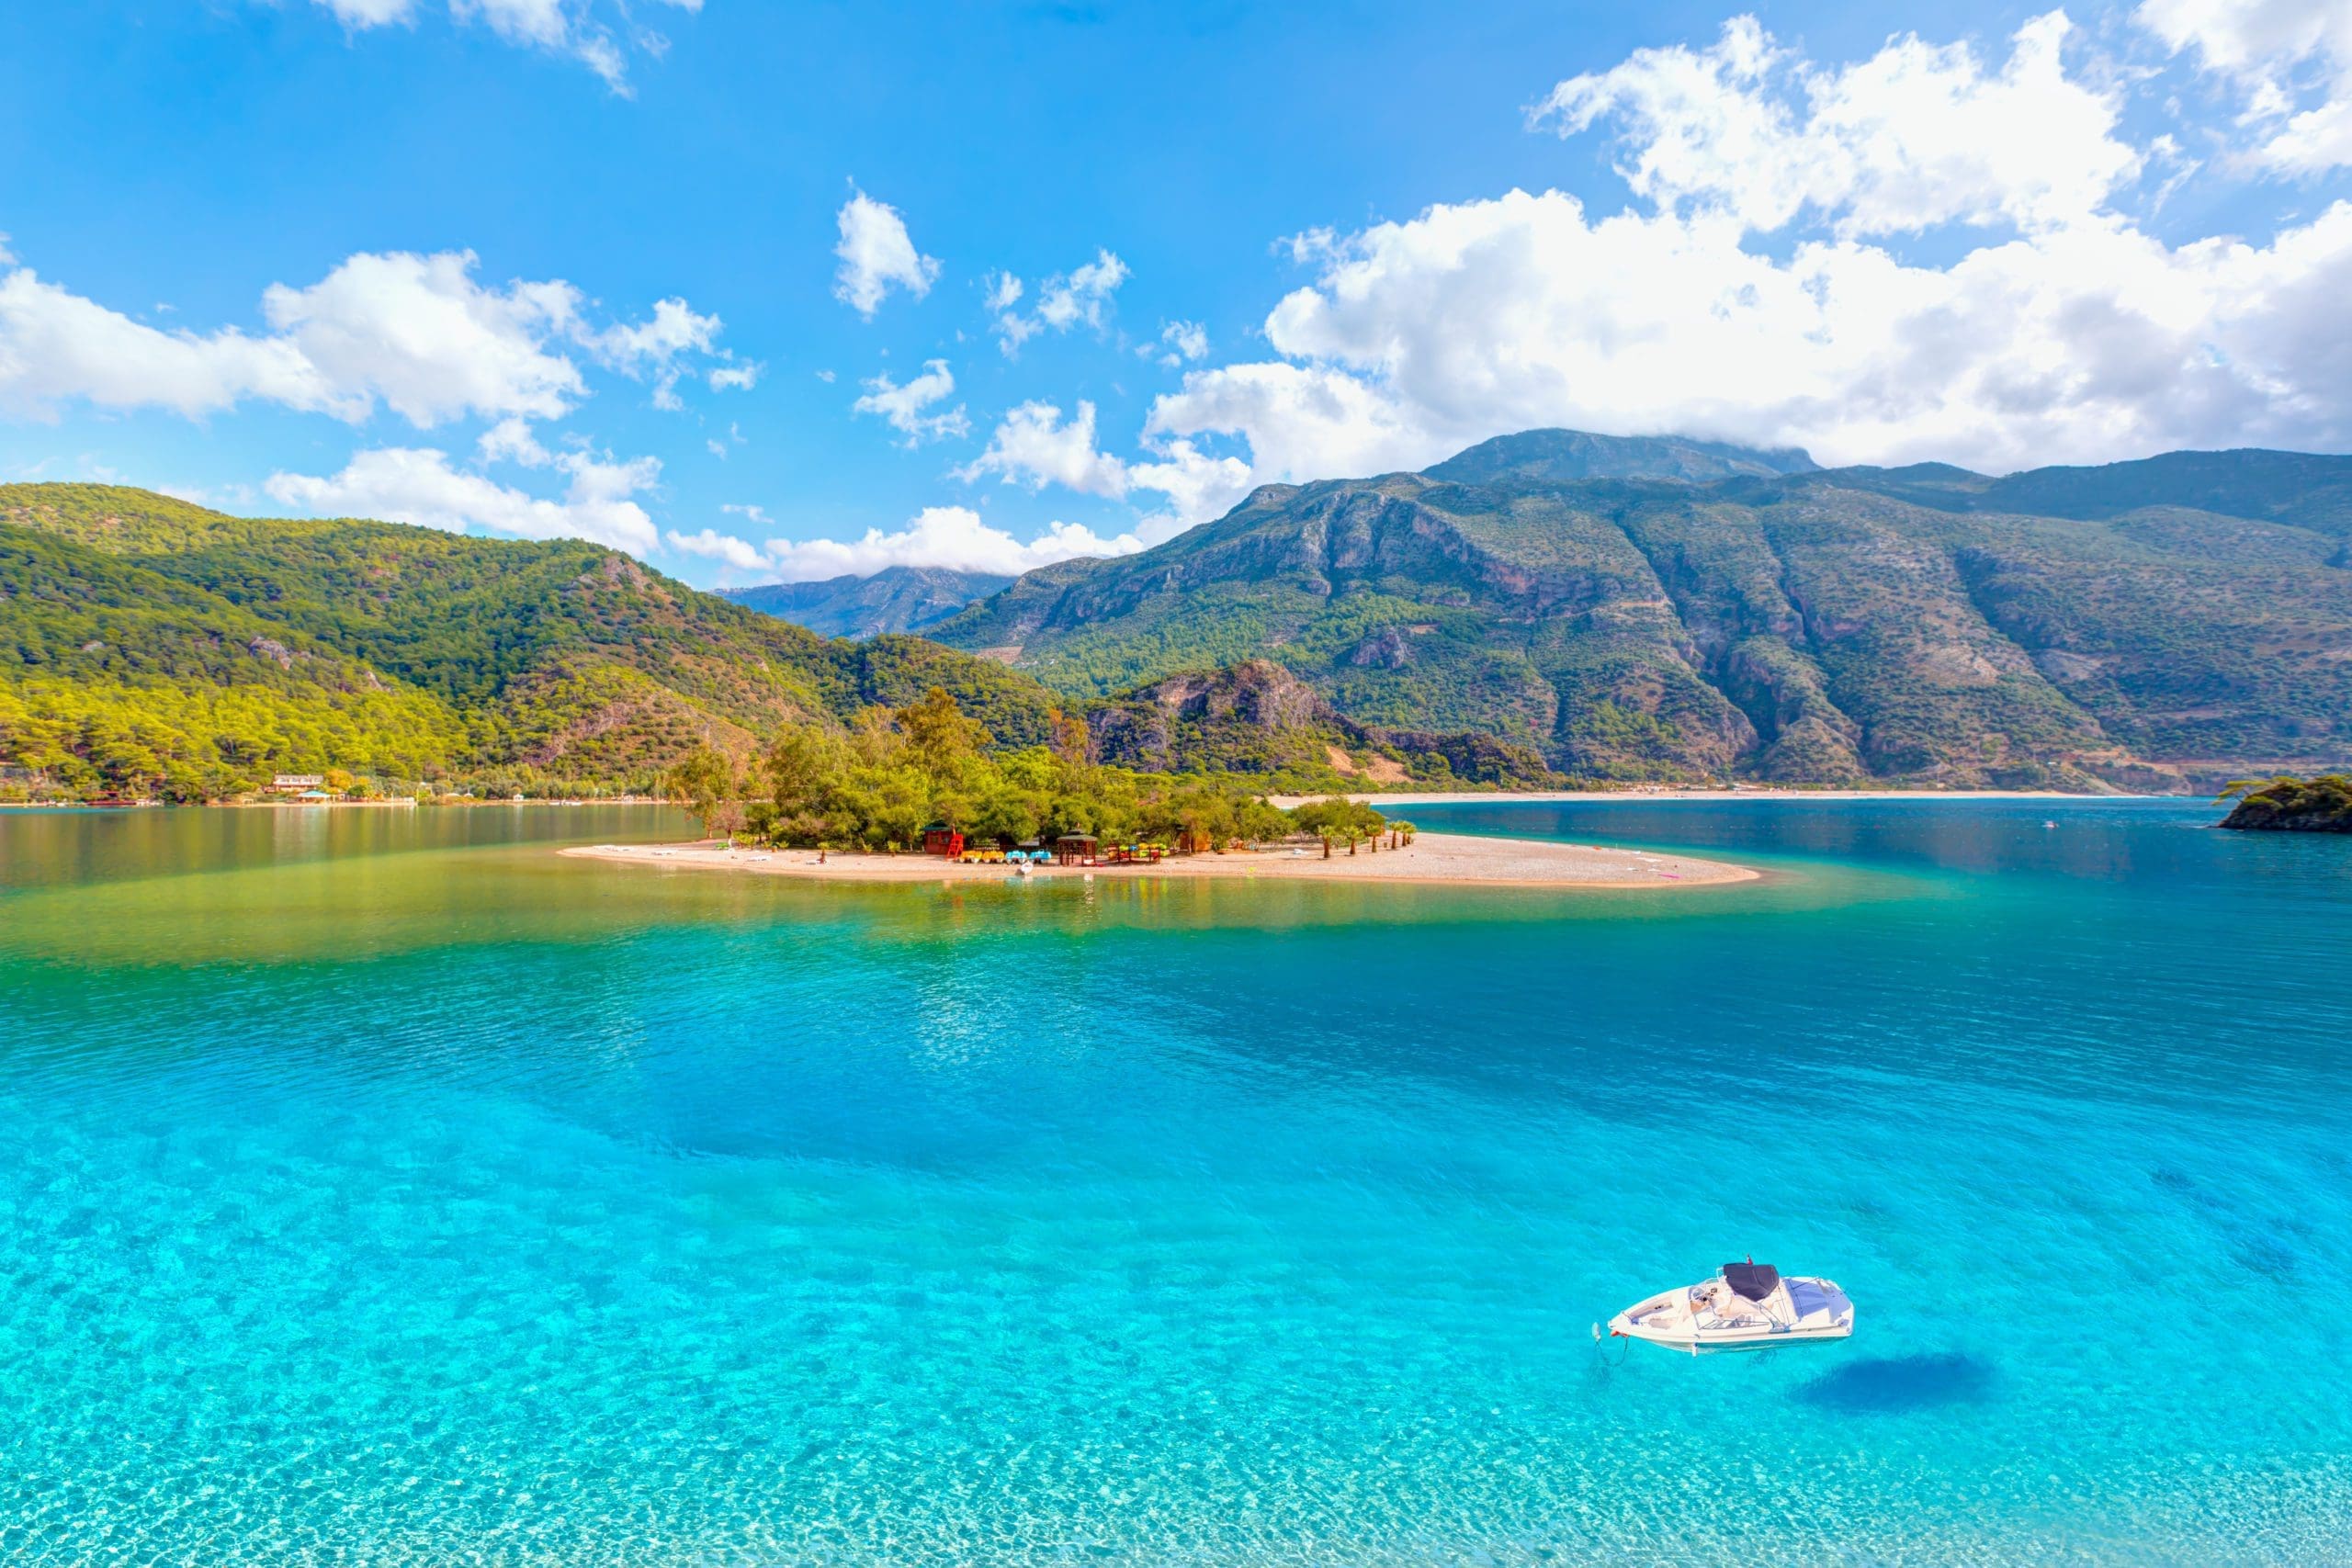 The best beaches in Europe